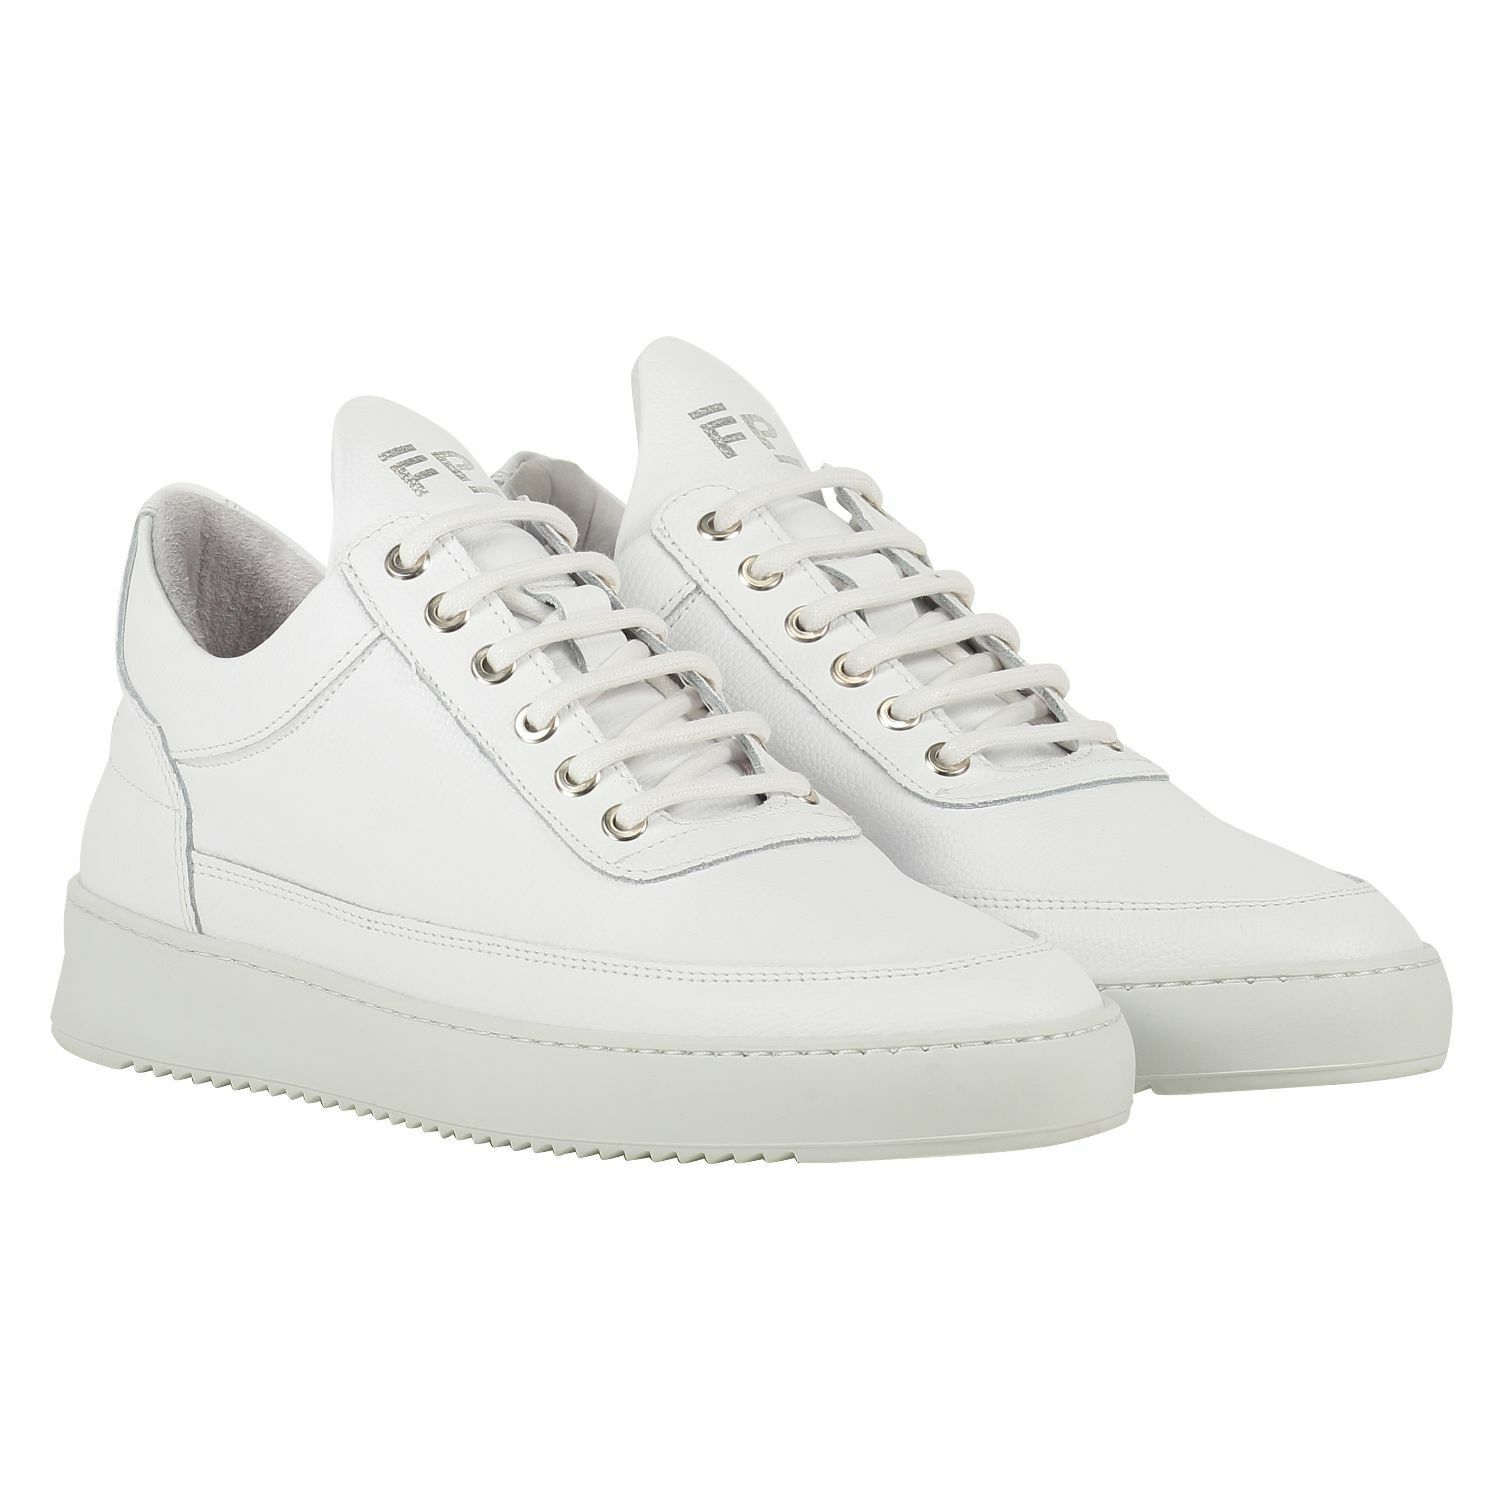 Higgins Intens drijvend Filling Pieces,low top crumbs all white